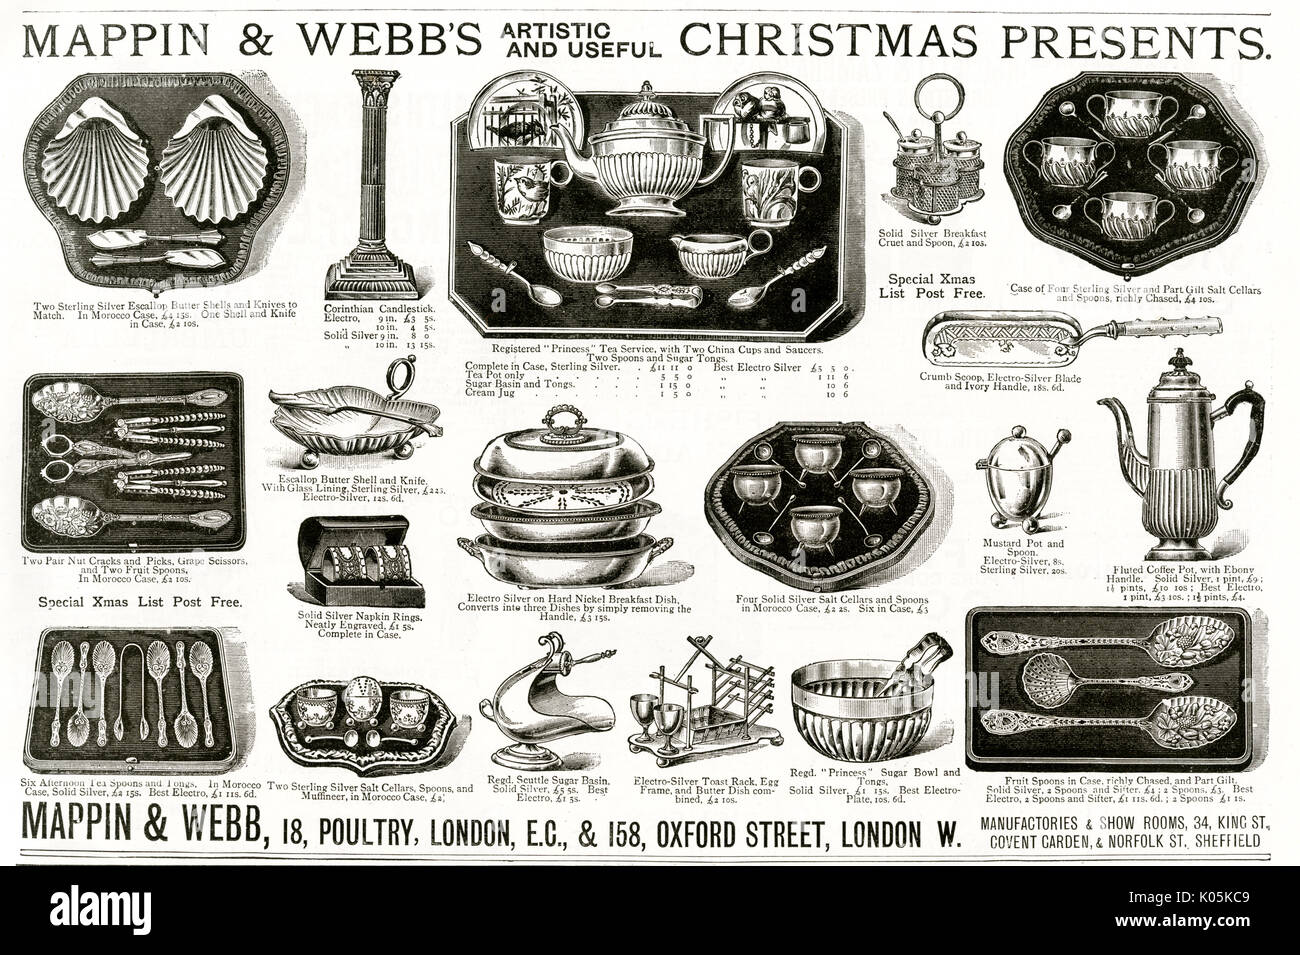 Advert for Mappin & Webb's Christmas presents 1888 Stock Photo